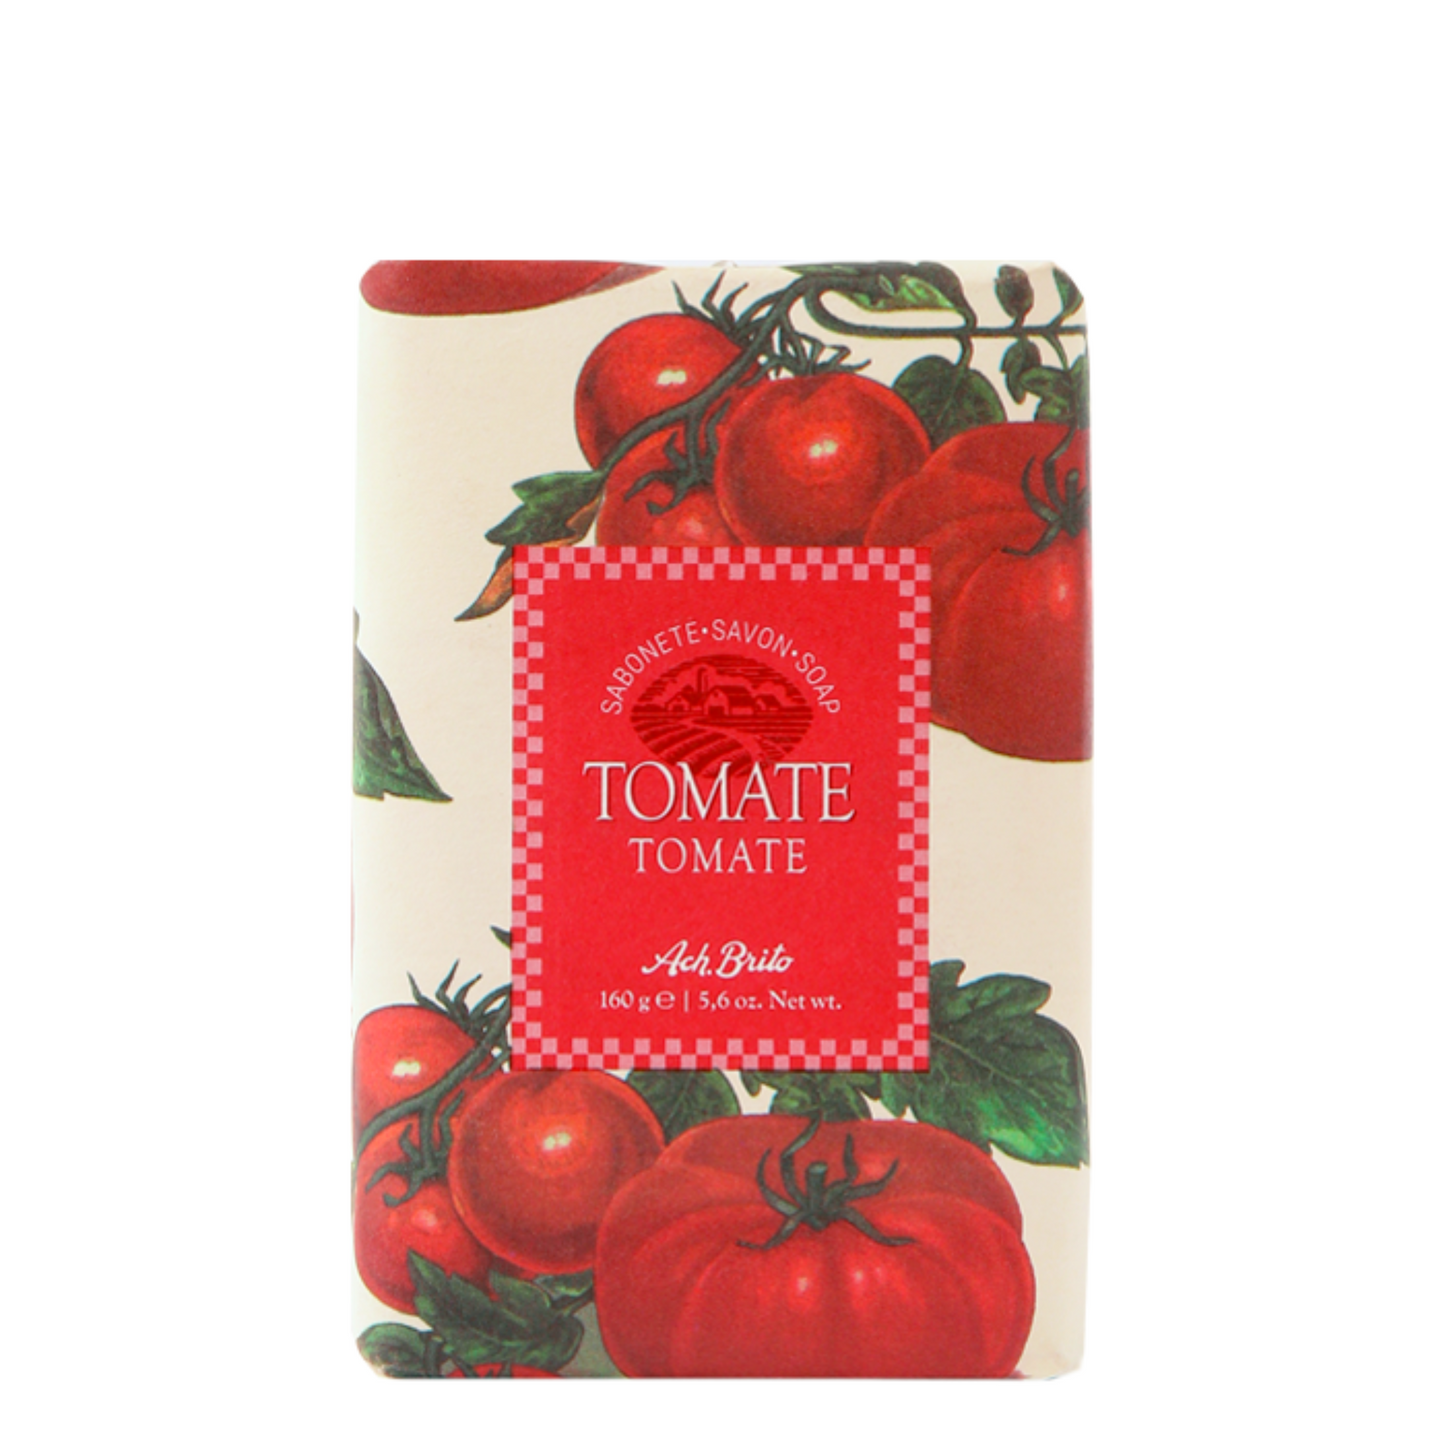 Primary Image of Tomato (Tomate) Bar Soap